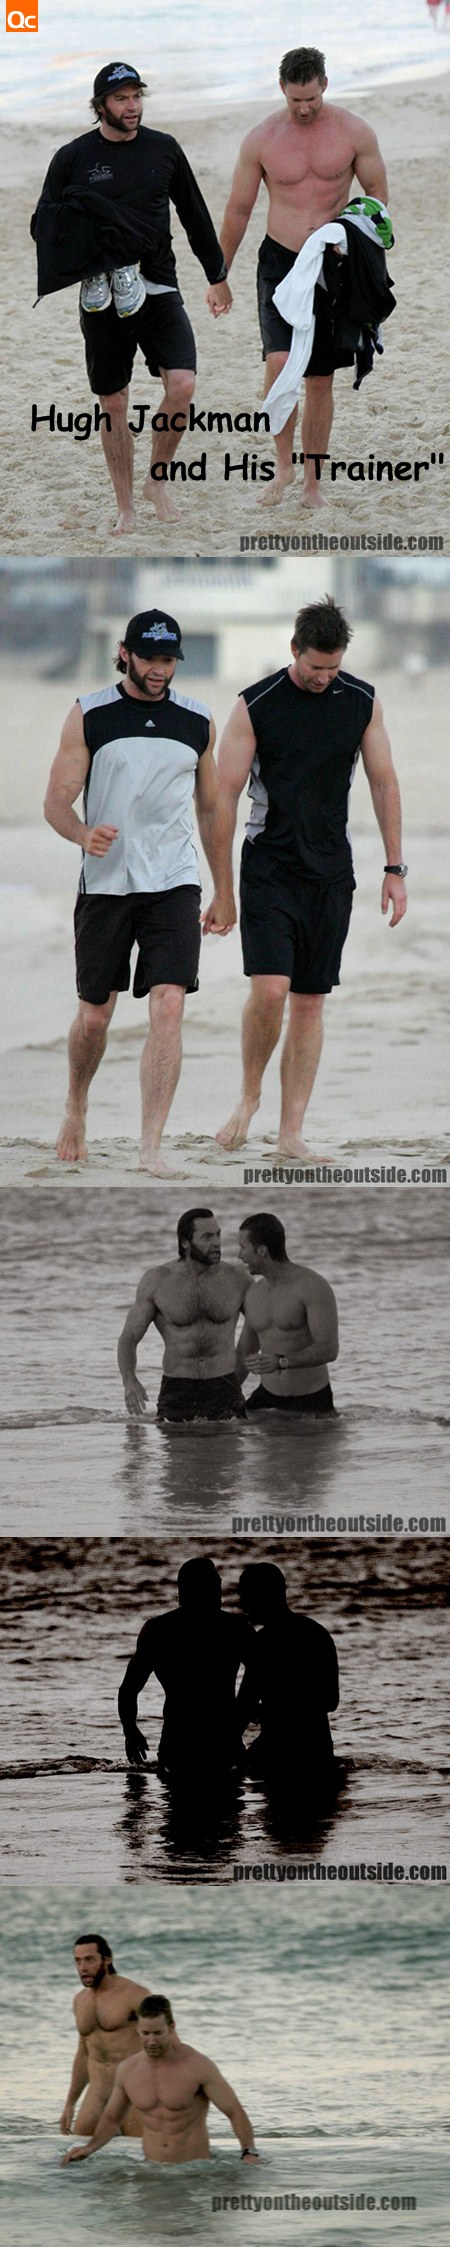 Hugh Jackman and His Trainer